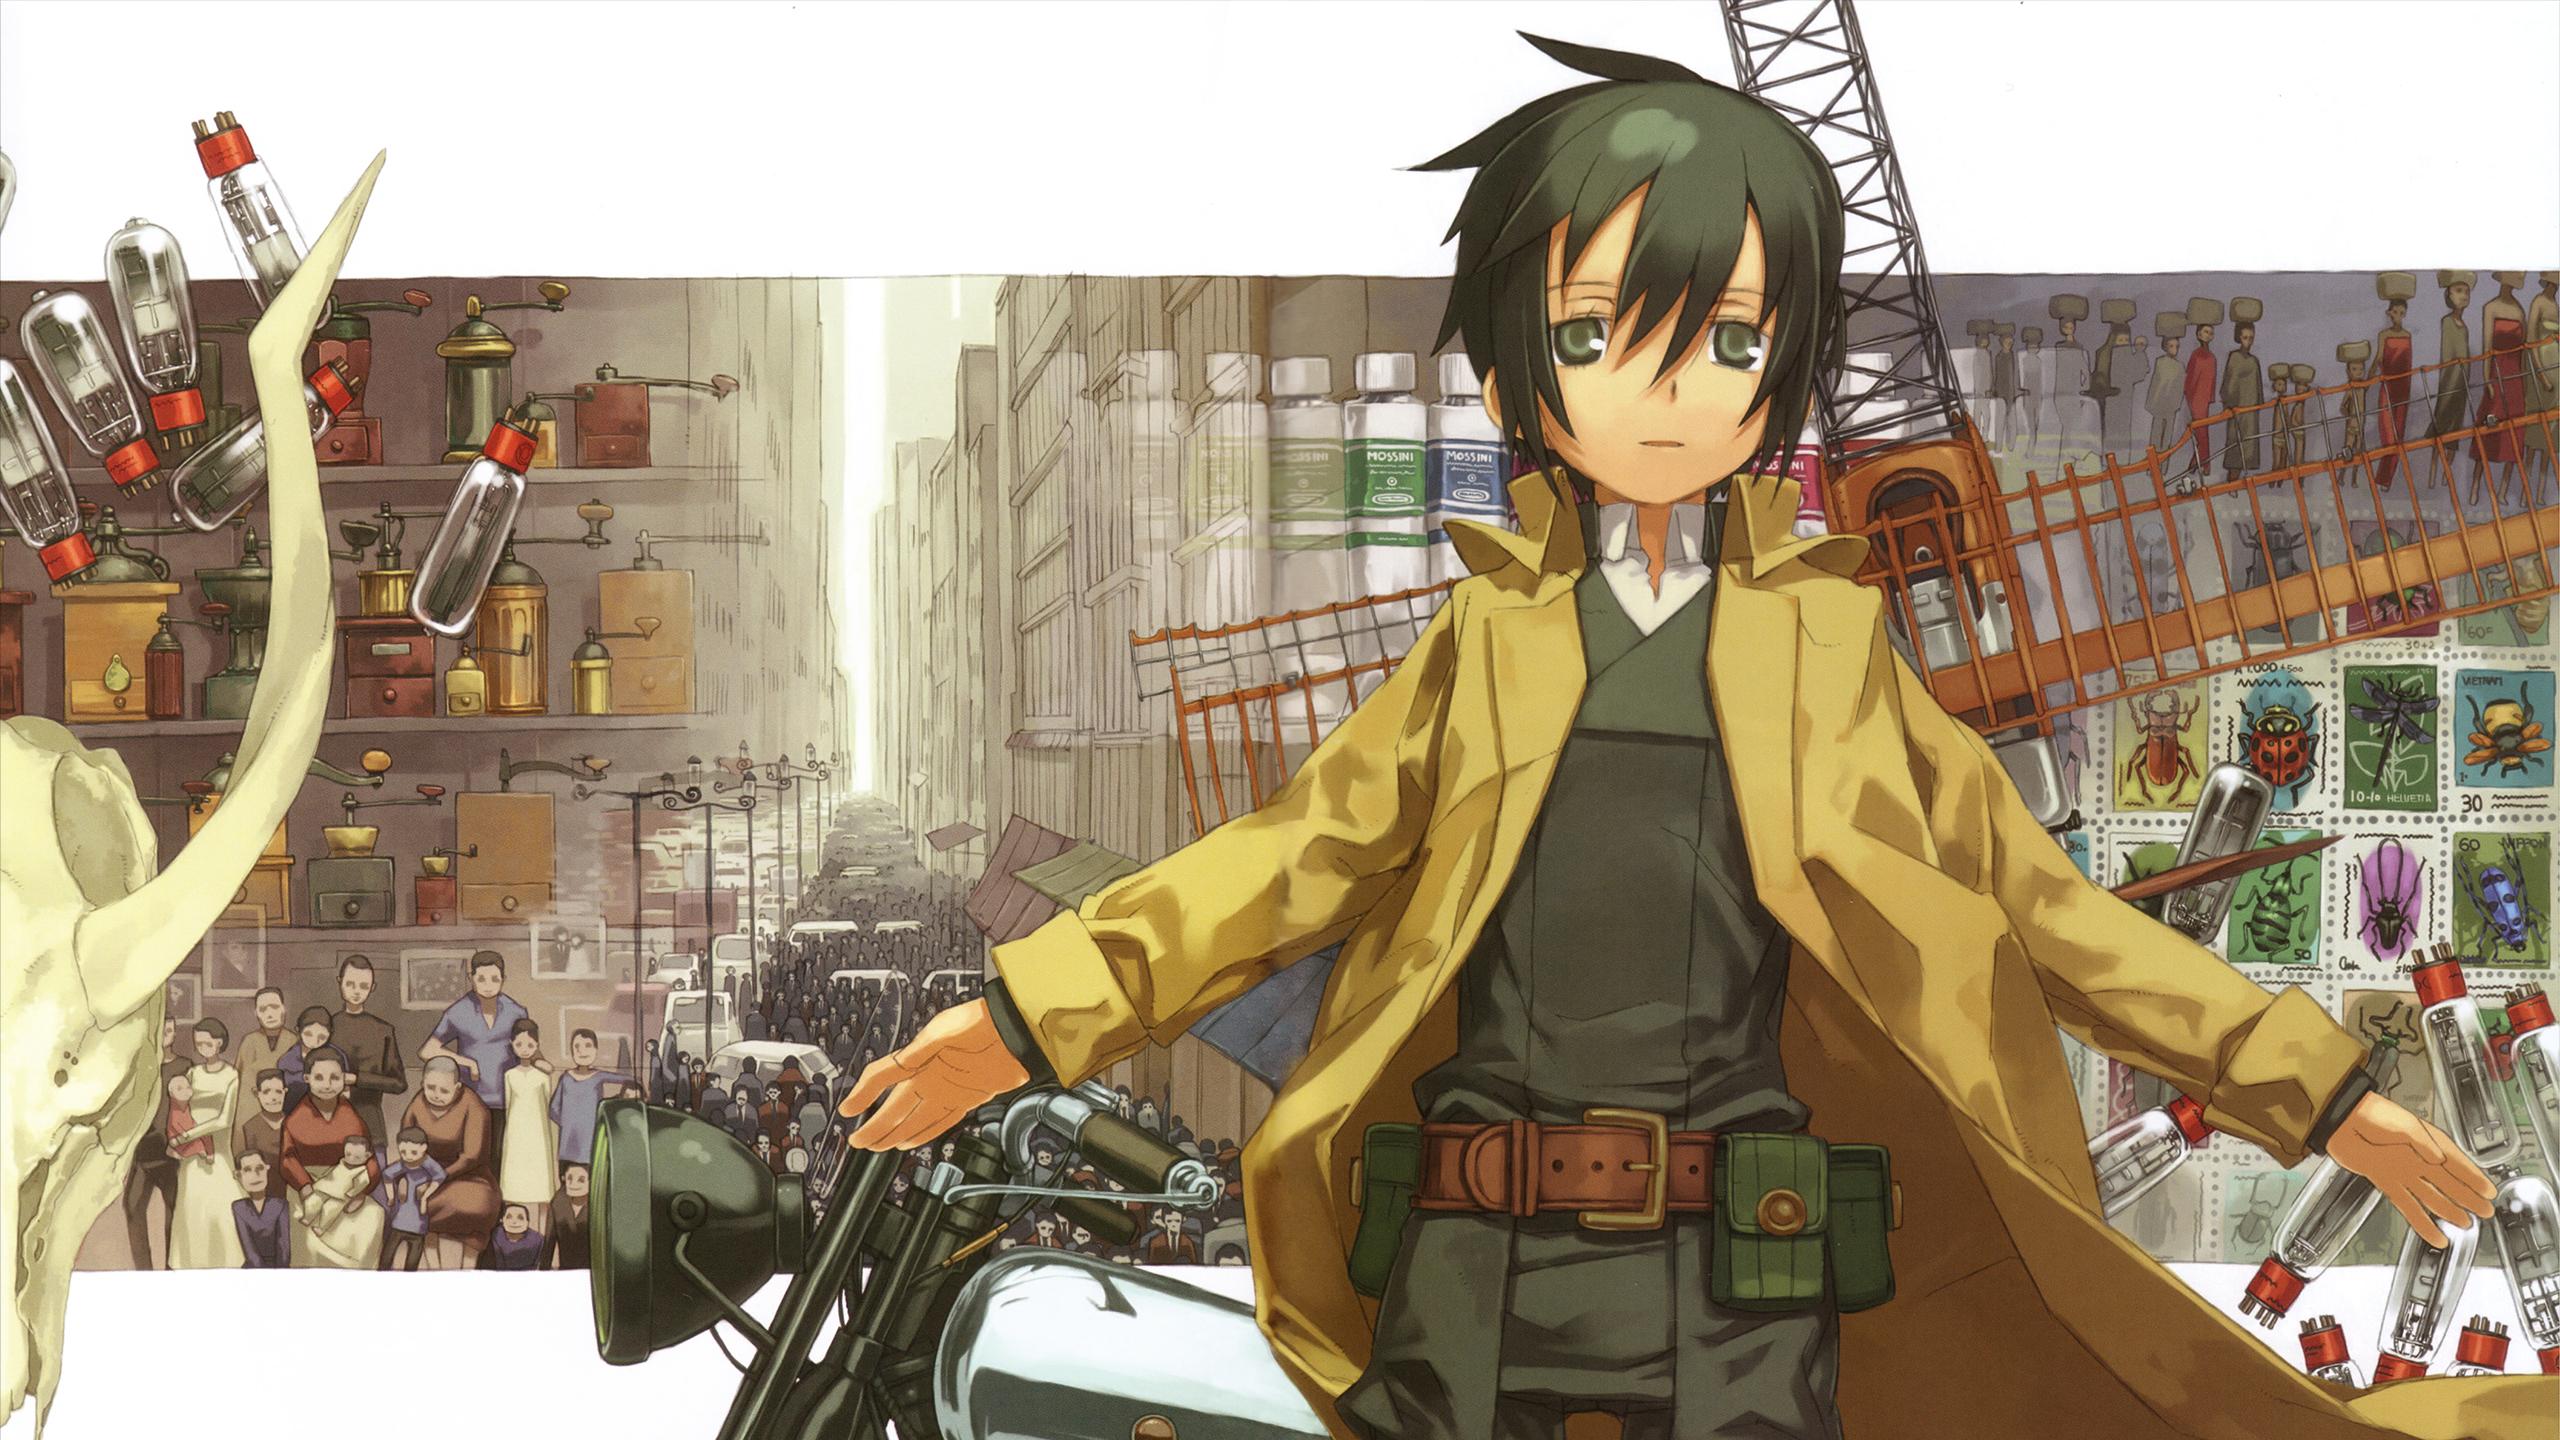 Welcome to my Kingdom! — Kino no Tabi Wallpaper (cleared by me)